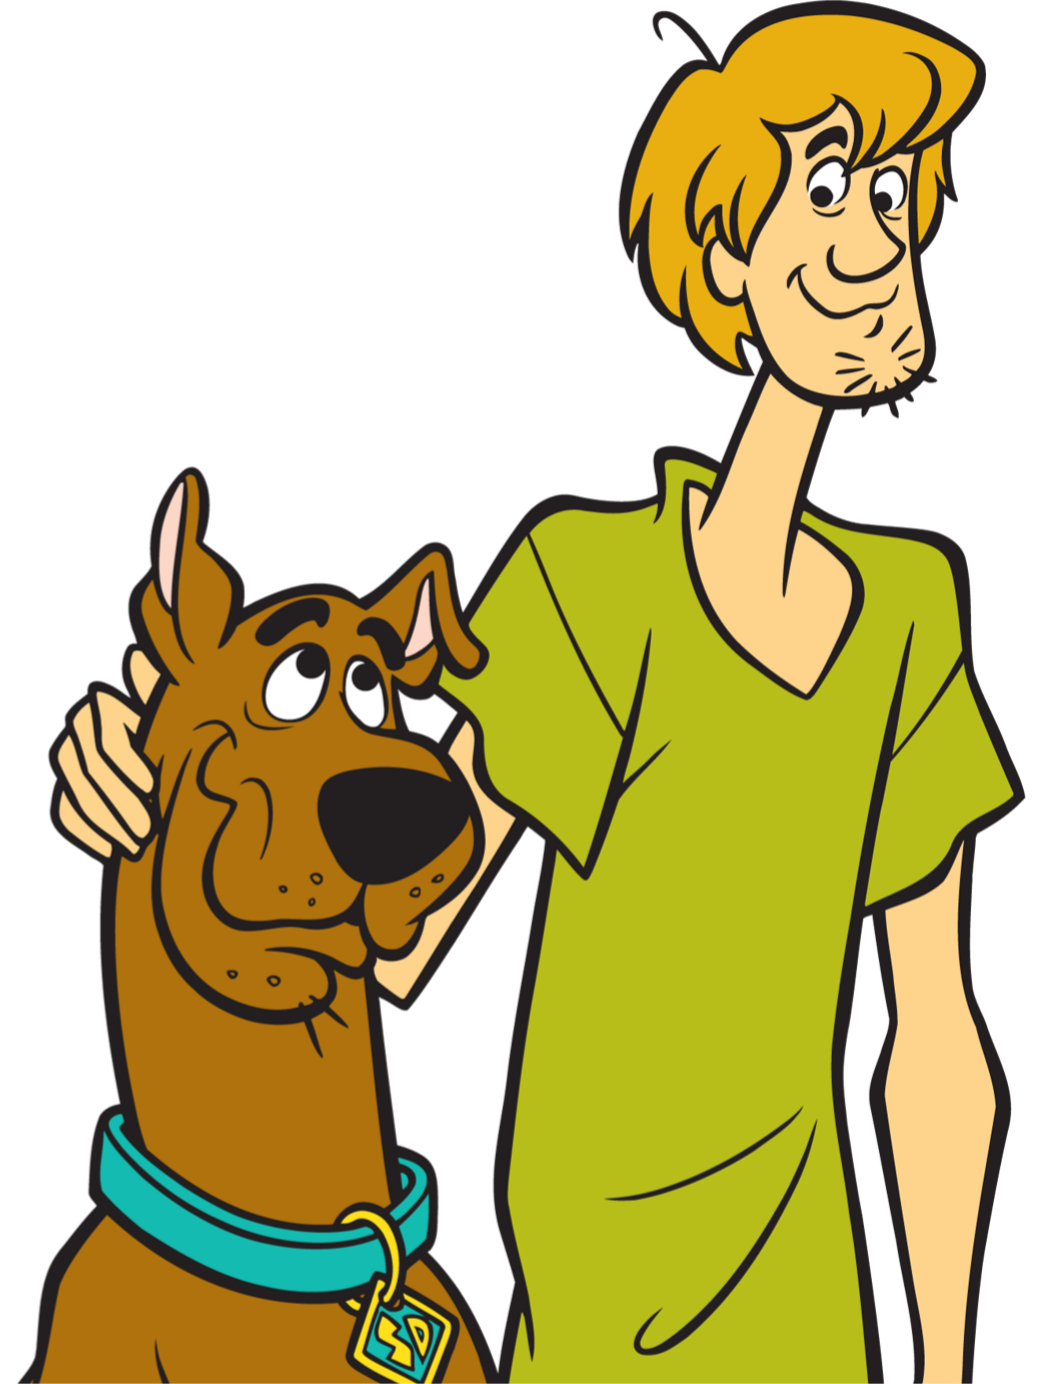 avik sengupta recommends pics of scooby doo and shaggy pic